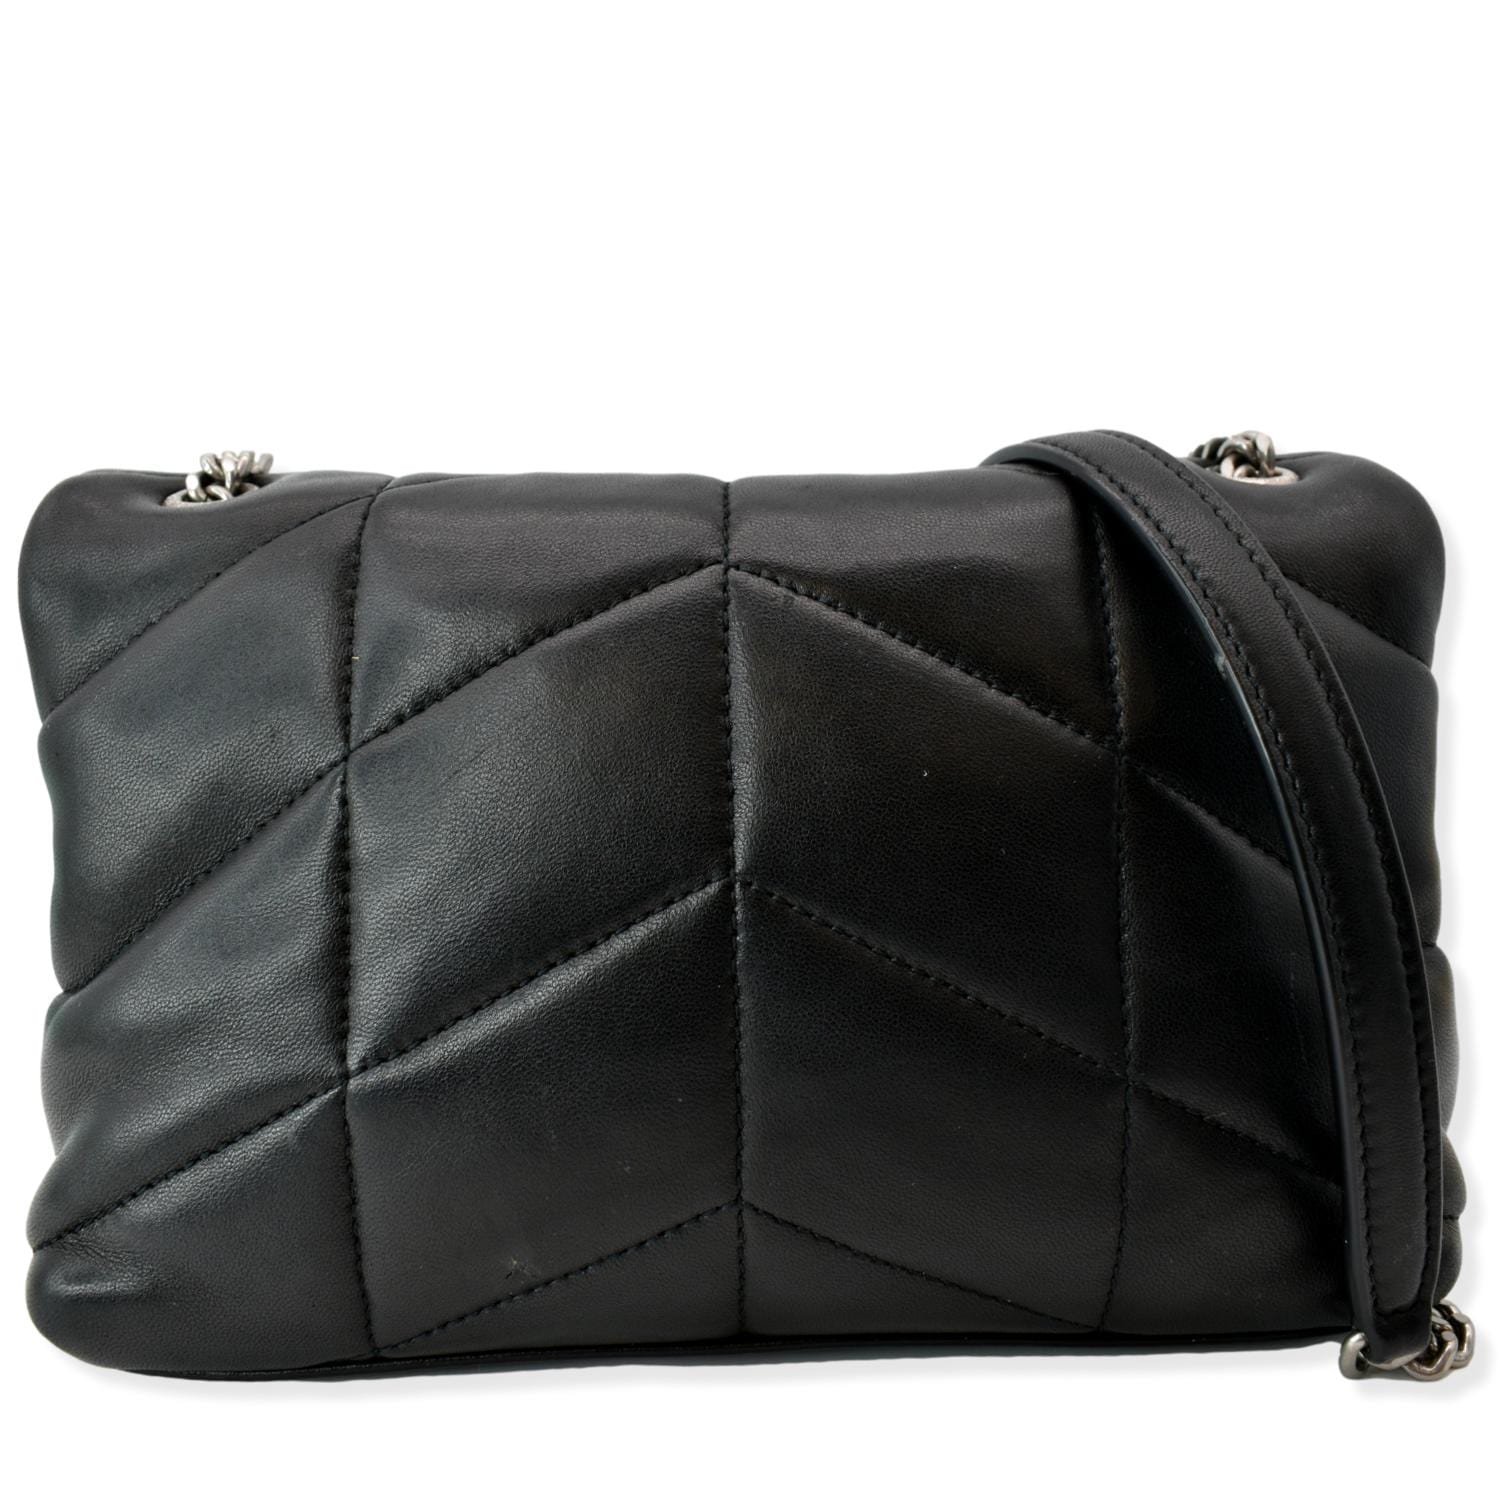 Chanel Dark Grey Quilted Puffy Leather Handbag Tote